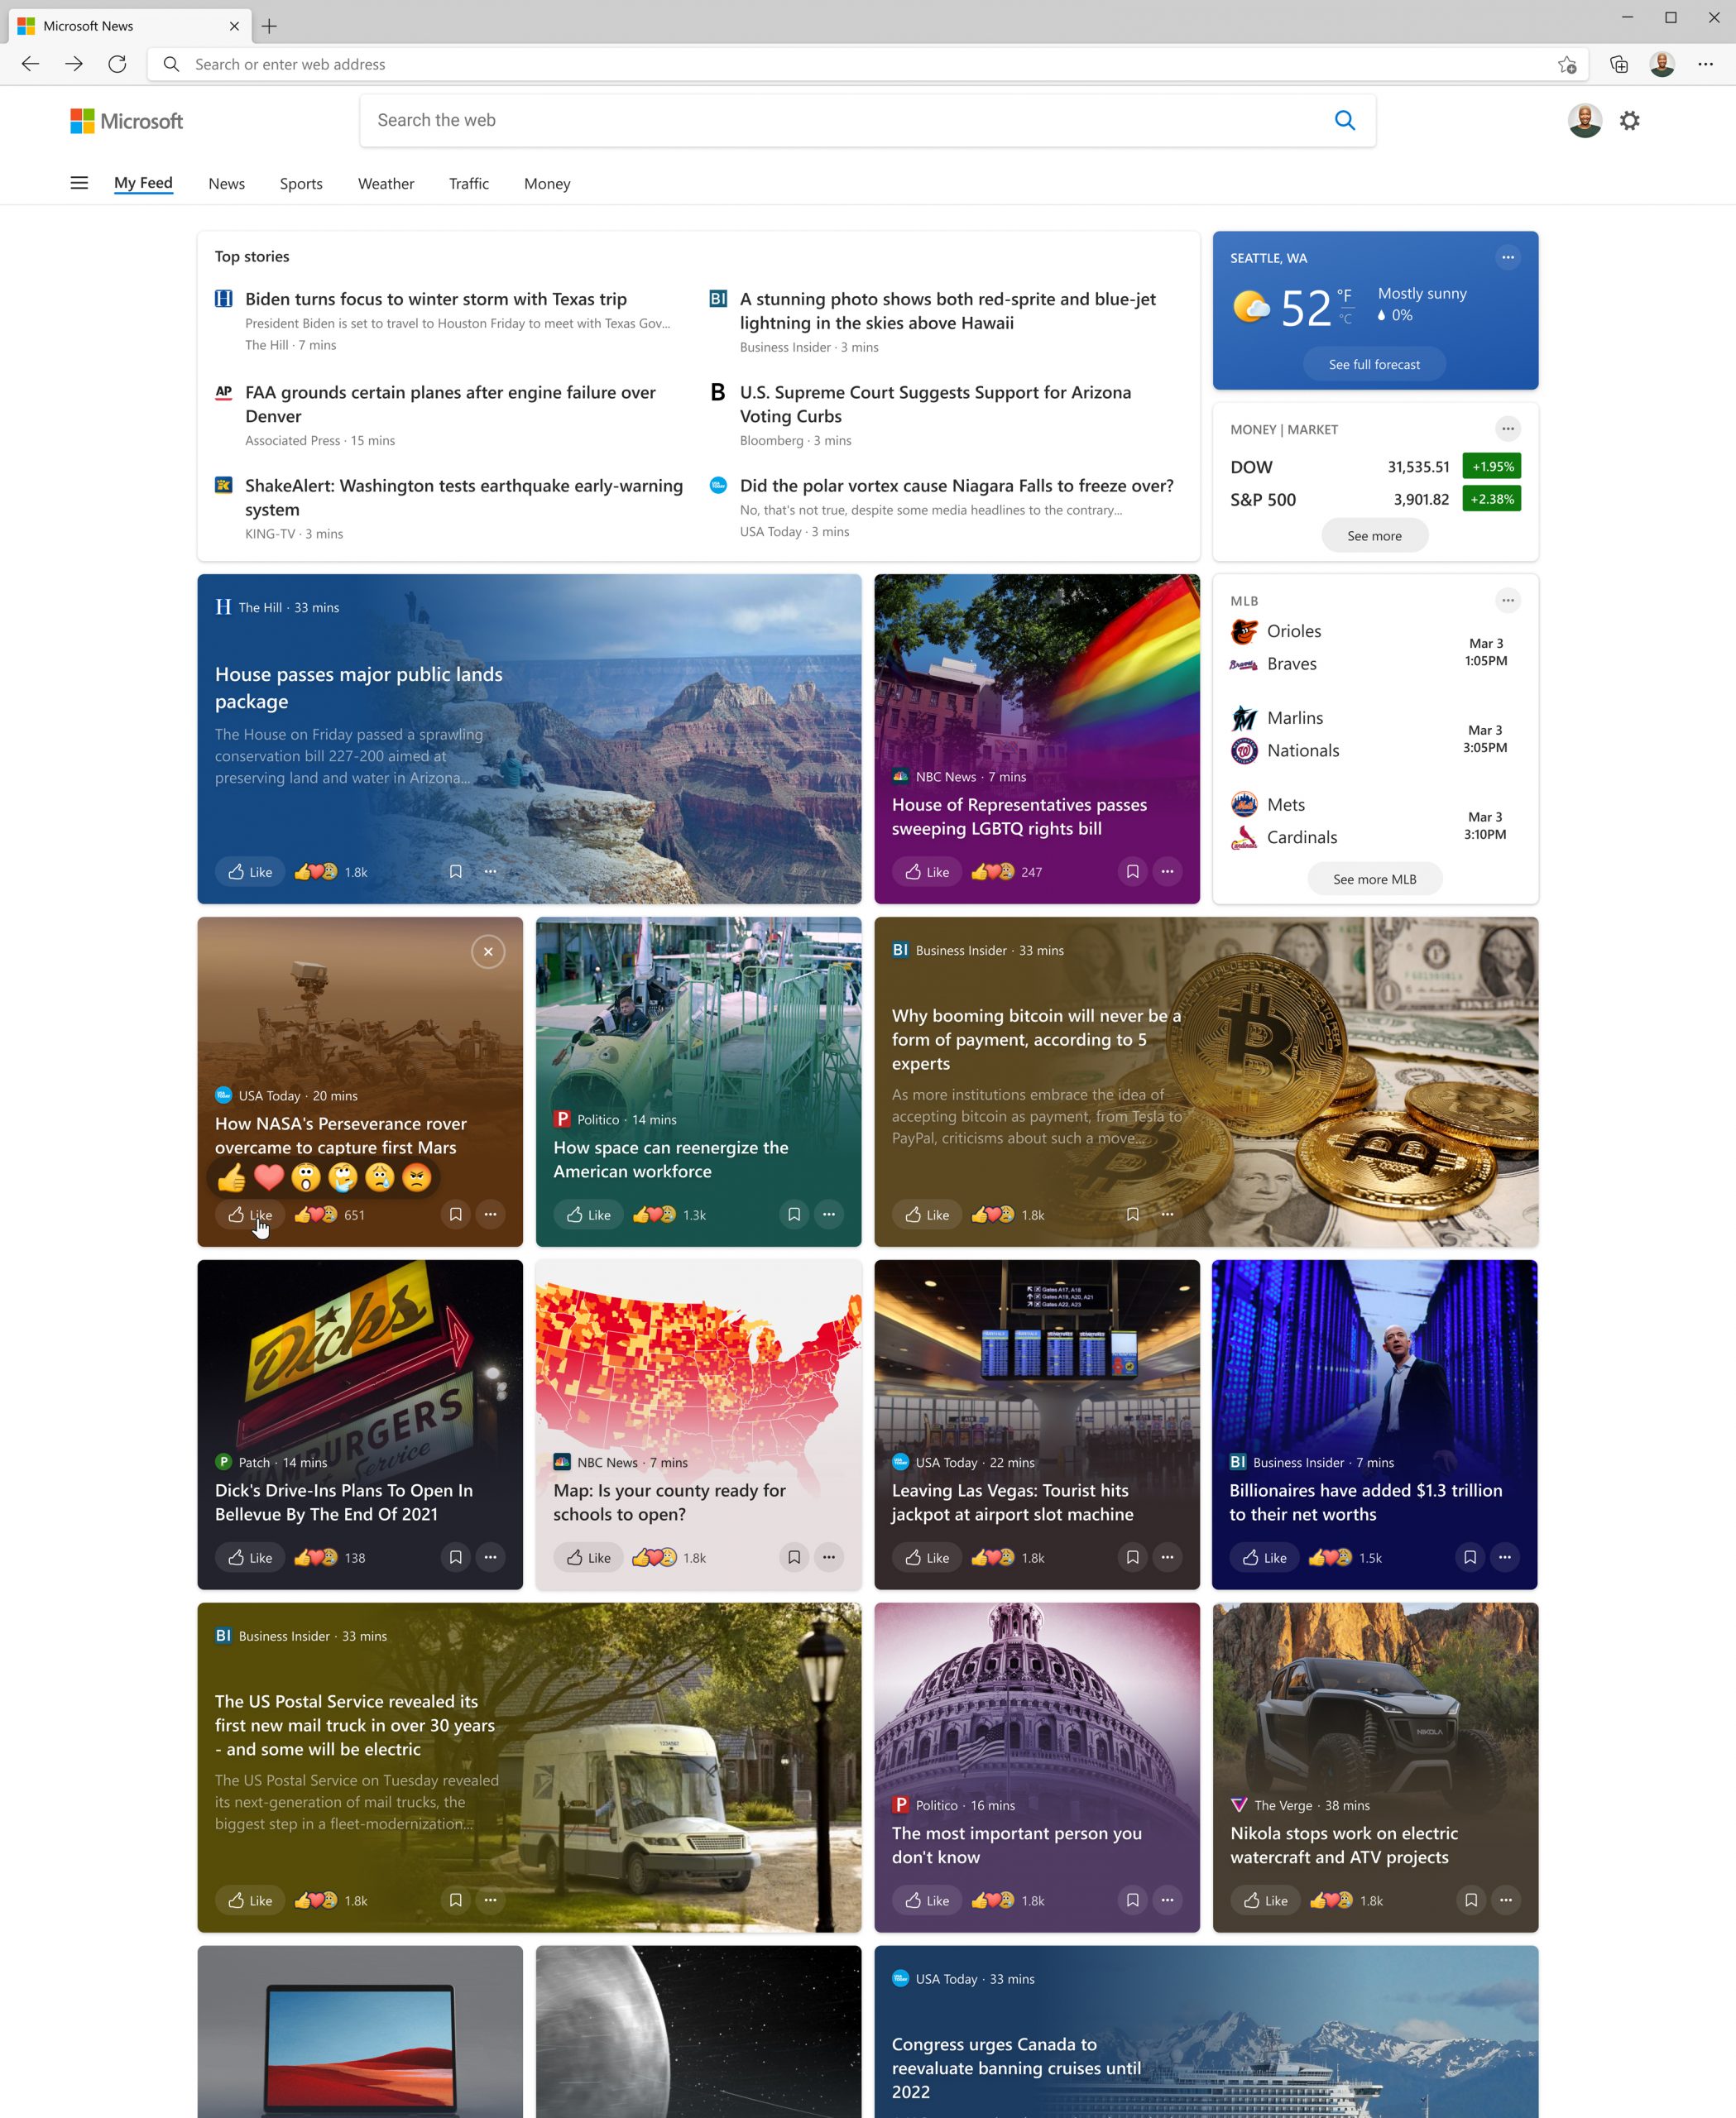 By clicking “See more news”, you get a redesigned feed experience with top headlines and a vibrant feed of personalized stories. 